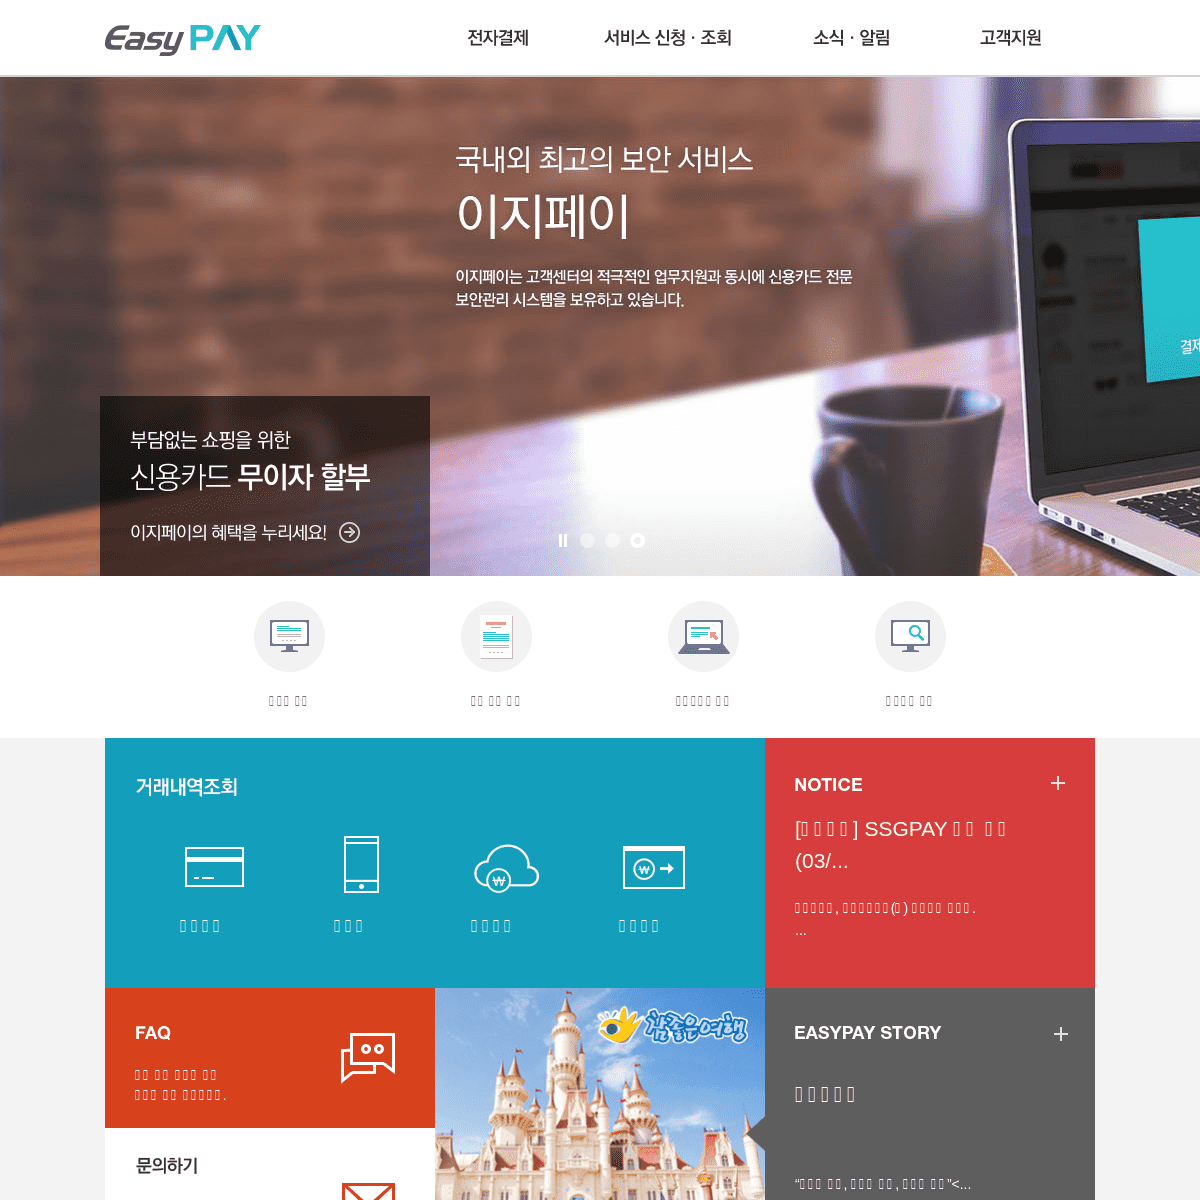 A complete backup of easypay.co.kr